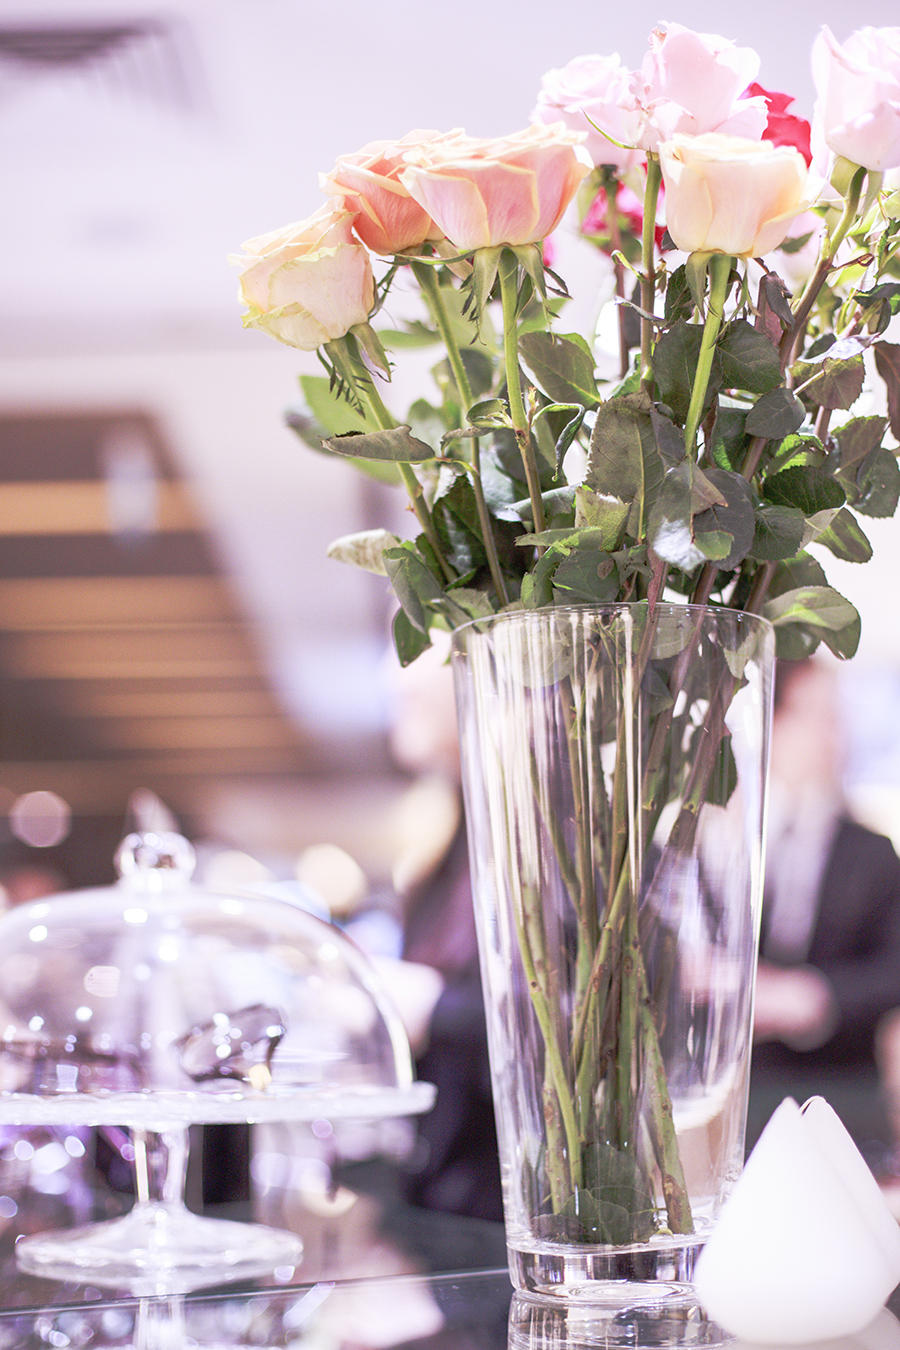 Decor and roses at the Her World x Optic Butler Event, Paragon, Singapore.